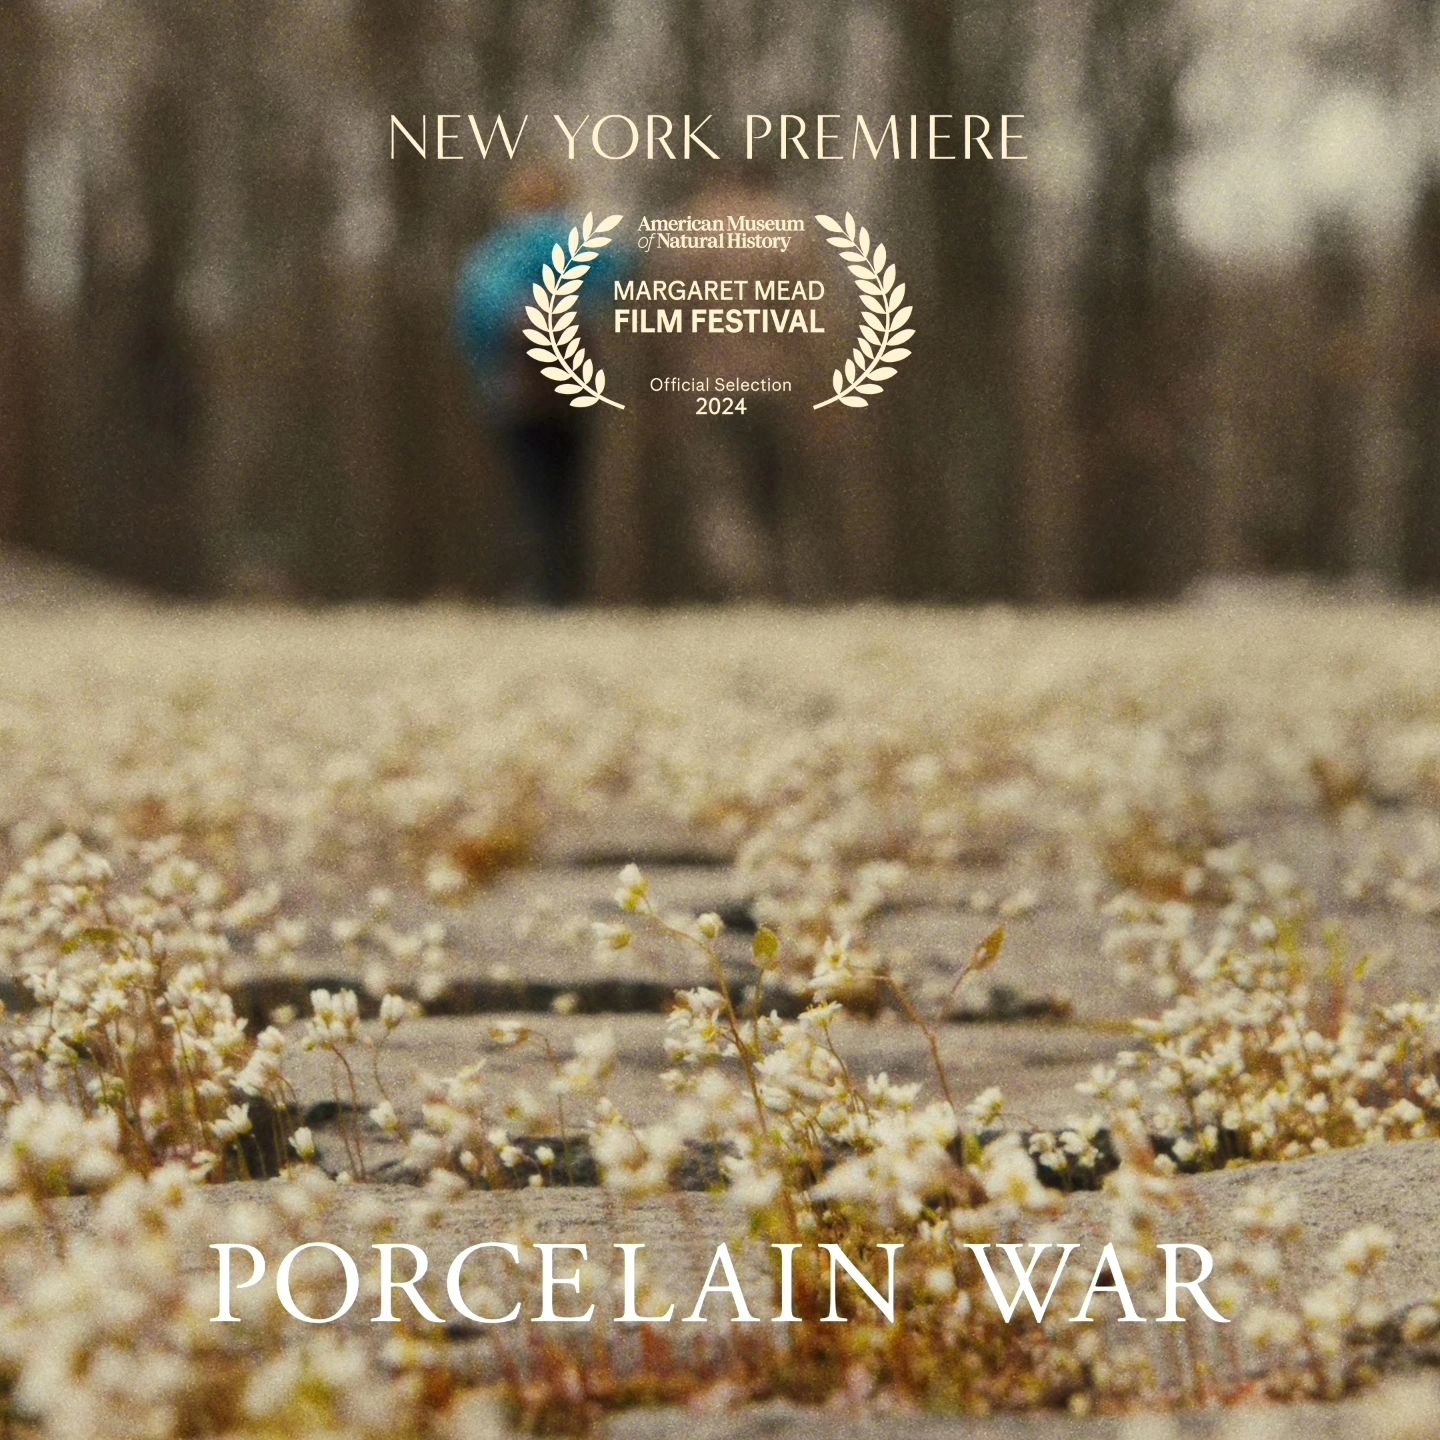 We are humbled to premiere Porcelain War in New York this weekend as the centerpiece film of the Margaret Mead Film Festival at the American Museum of Natural History.

Following the screening will be a Q&amp;A with Directors Brendan Bellomo and Slav